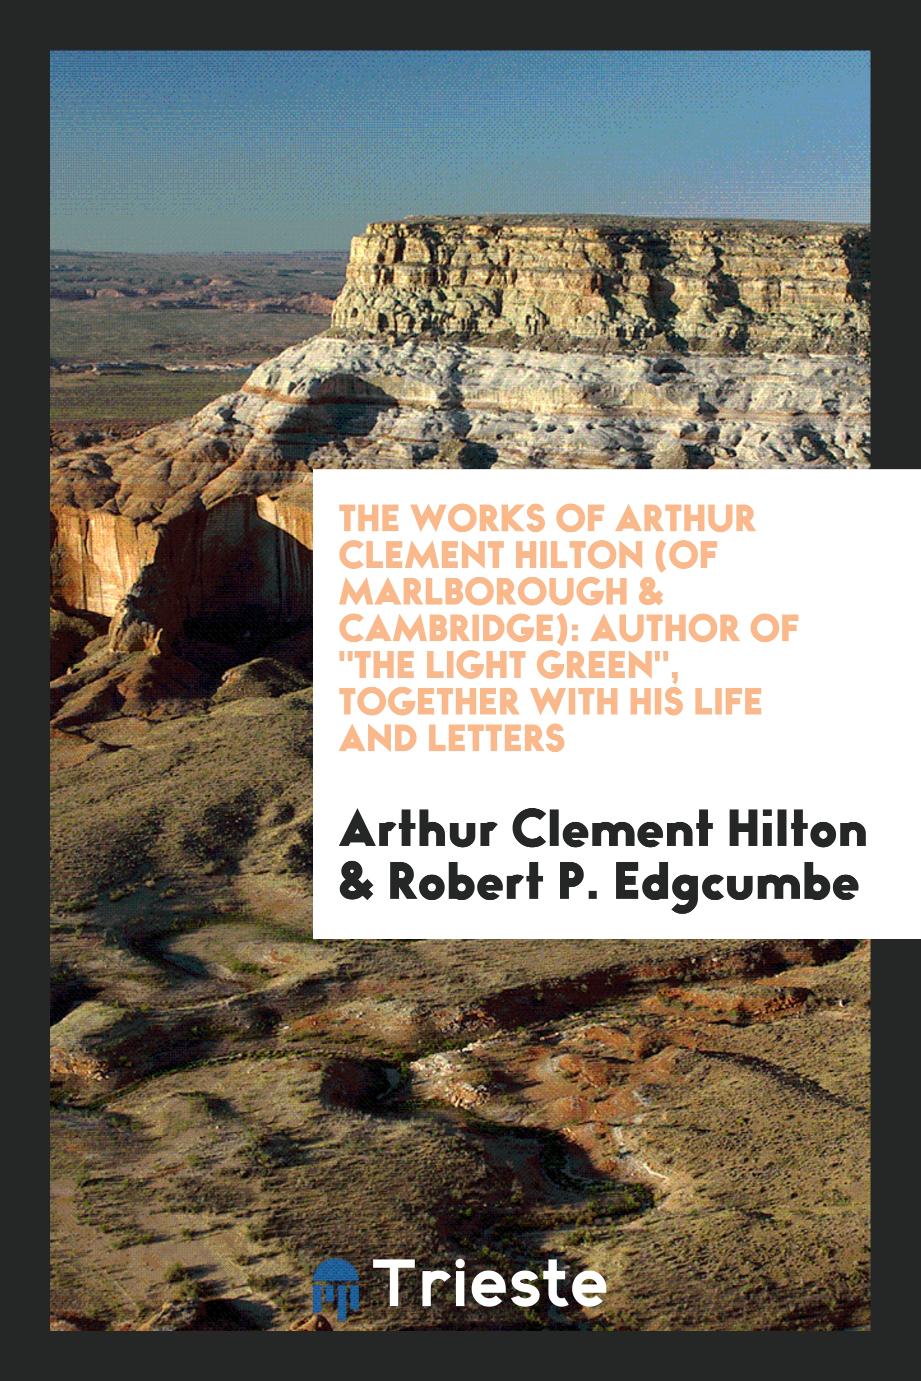 The works of Arthur Clement Hilton (of Marlborough & Cambridge): author of "The light green", together with his life and letters